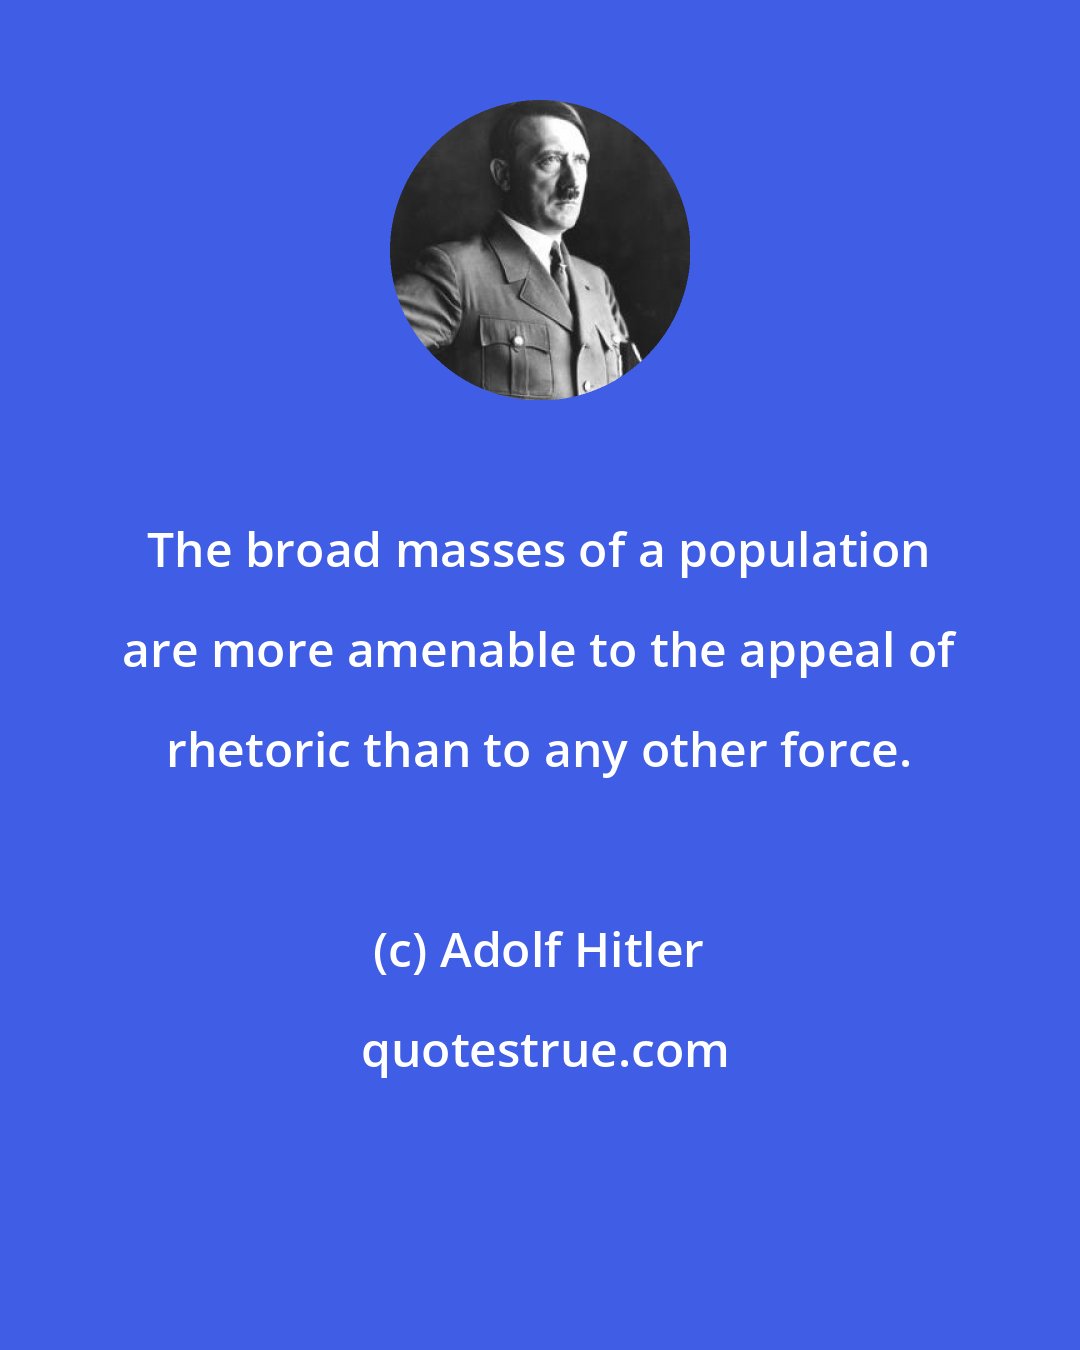 Adolf Hitler: The broad masses of a population are more amenable to the appeal of rhetoric than to any other force.